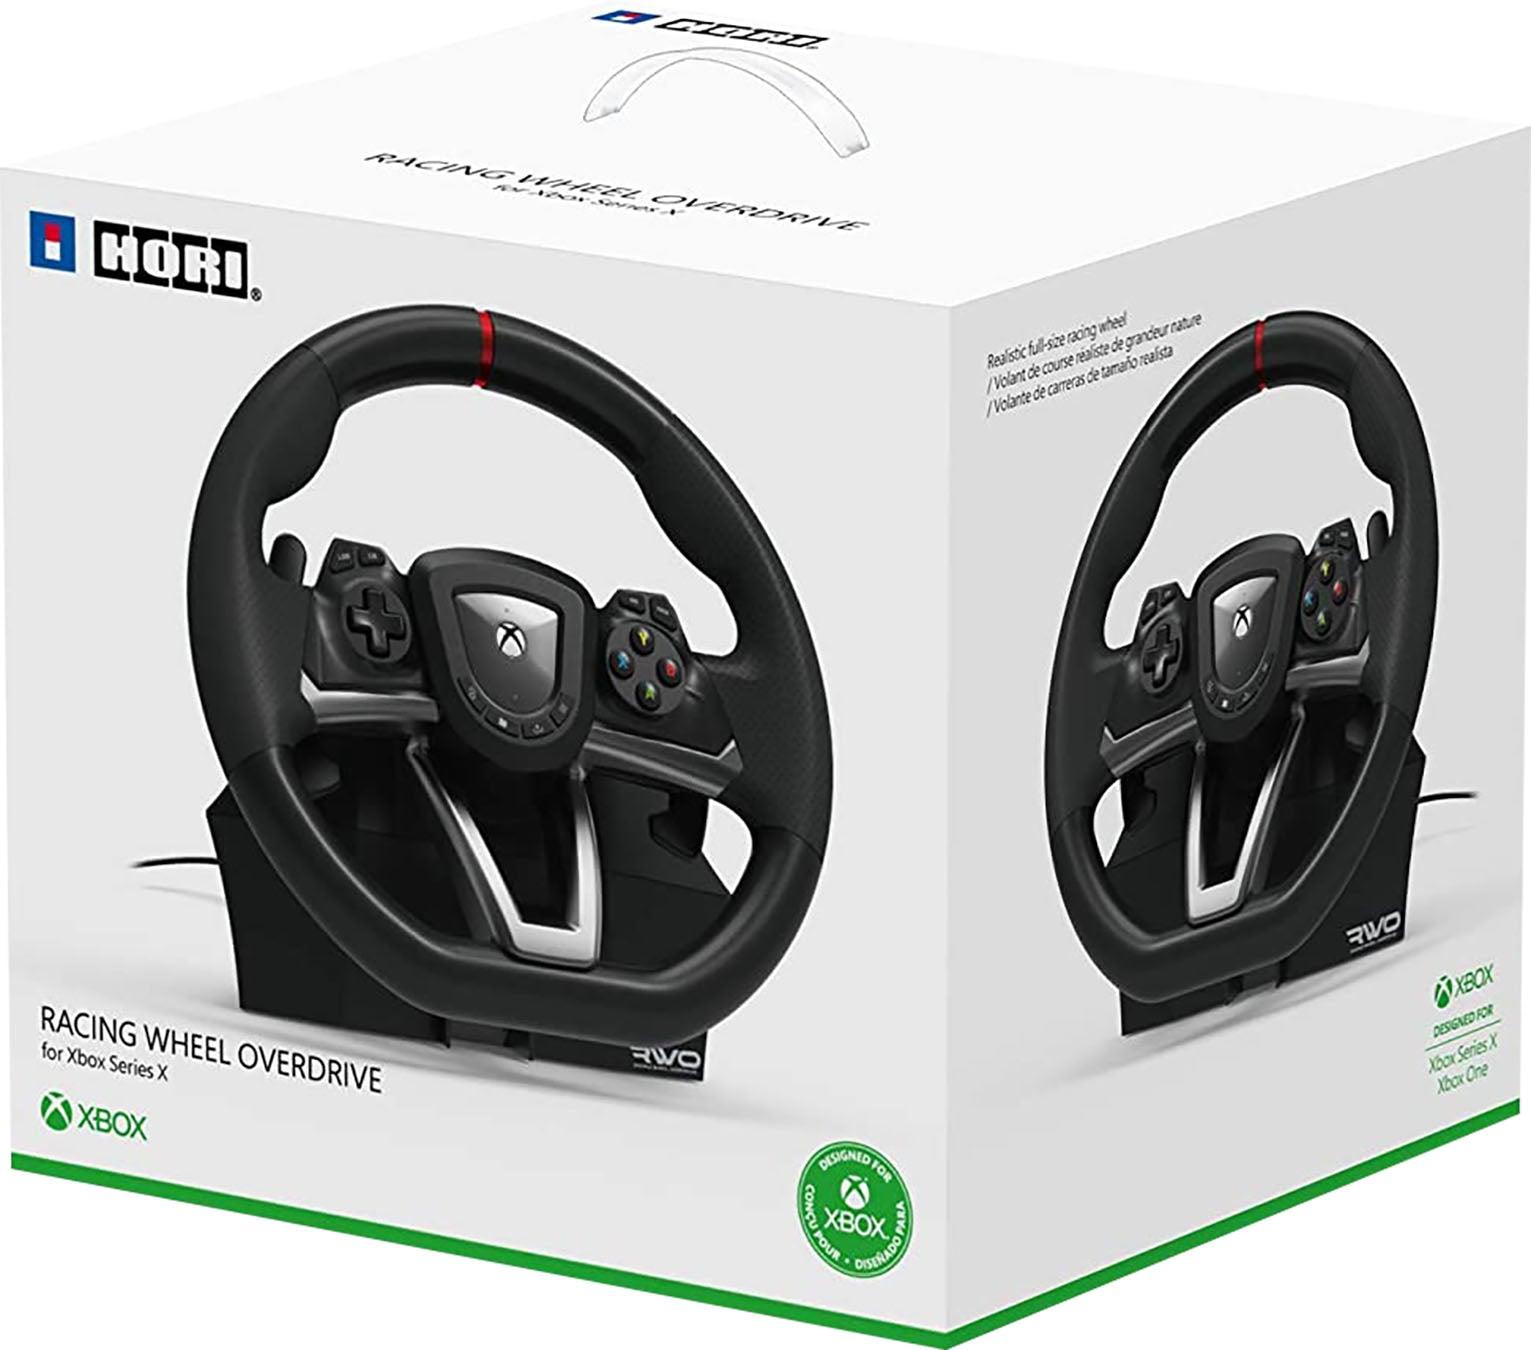 Racing Wheel Overdrive - Want a New Gadget